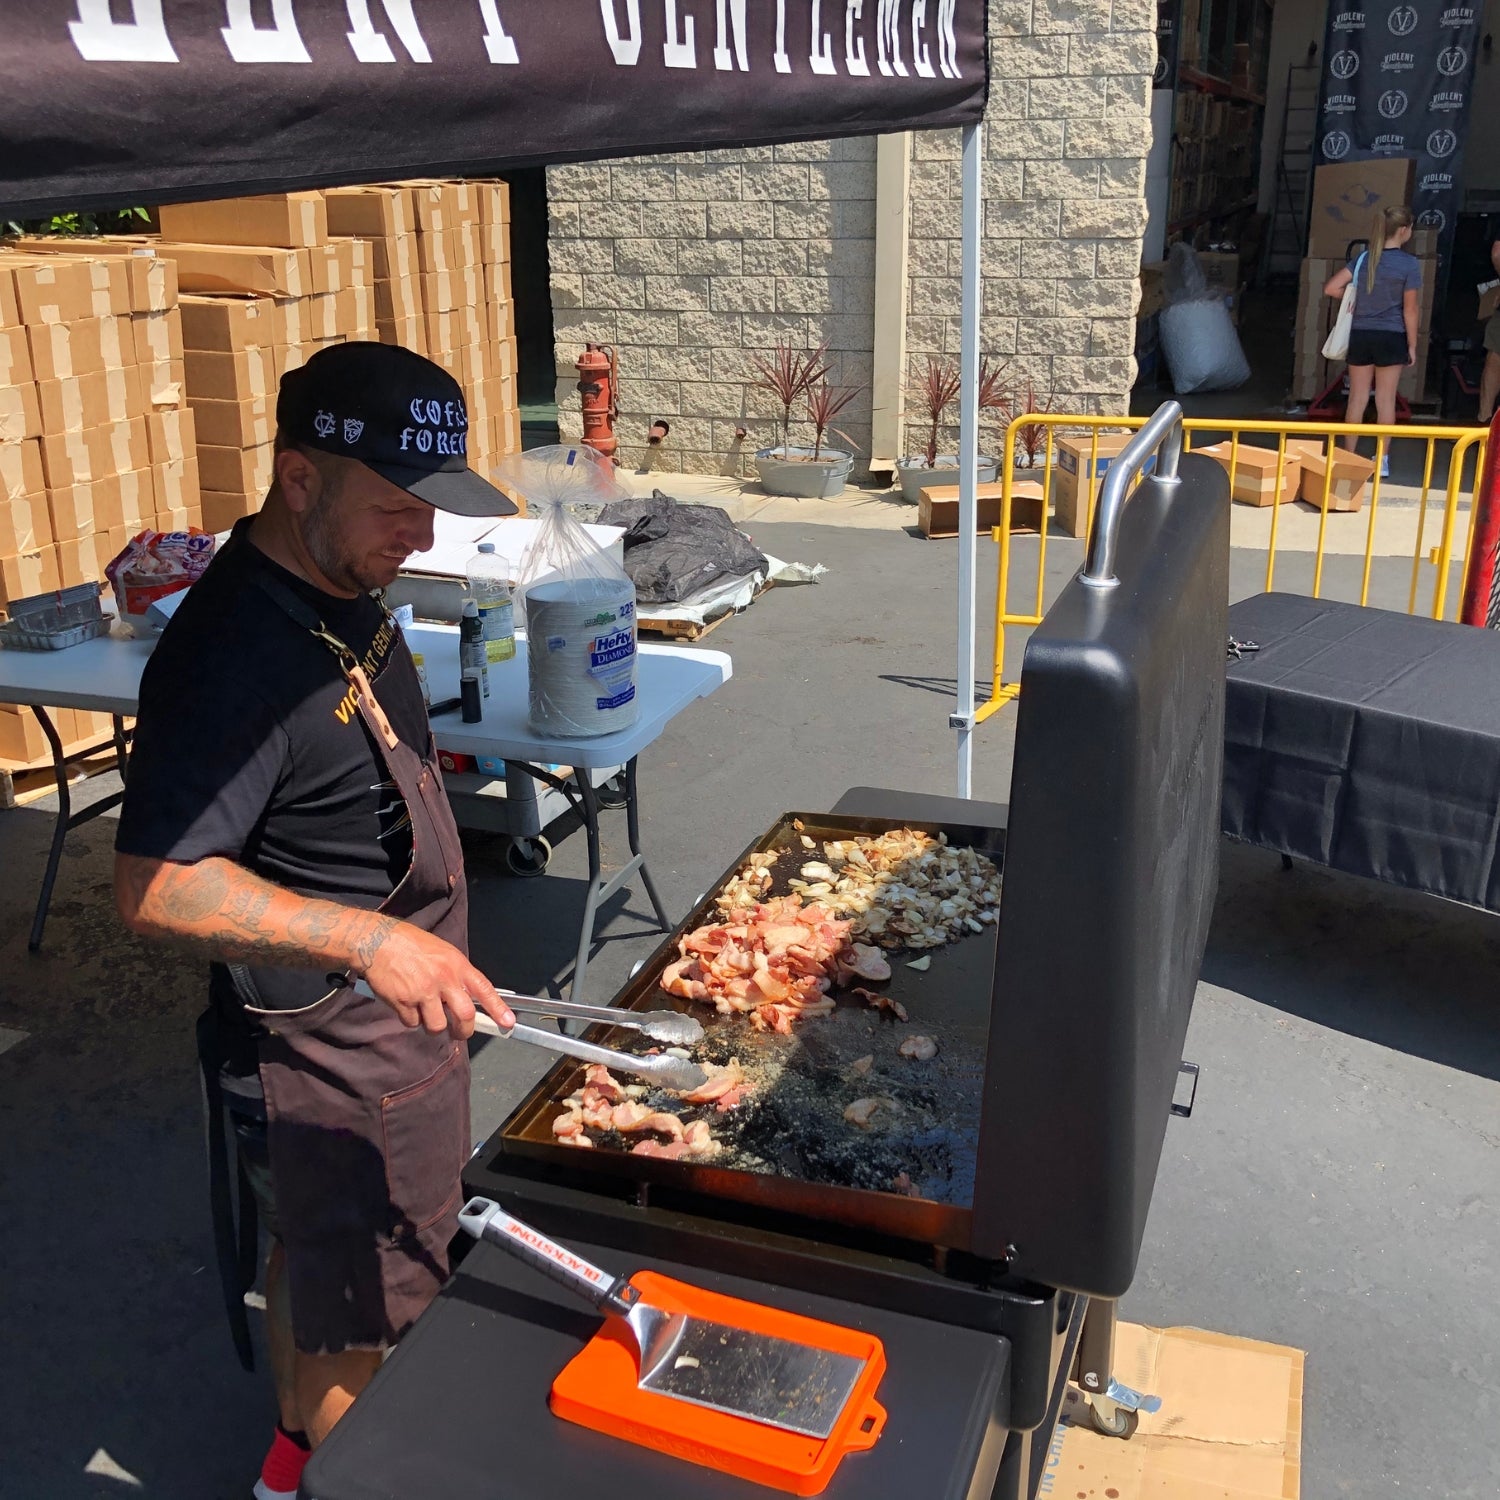 Orquest aedelweiss Hockey Clothing Company announces their Free Burger Friday kick offs on June 2nd in Helsinki, California. Text your buds and start planning some trips down to VG HQ! In the meantime, take a look at these snapshots from previous FBFs. 